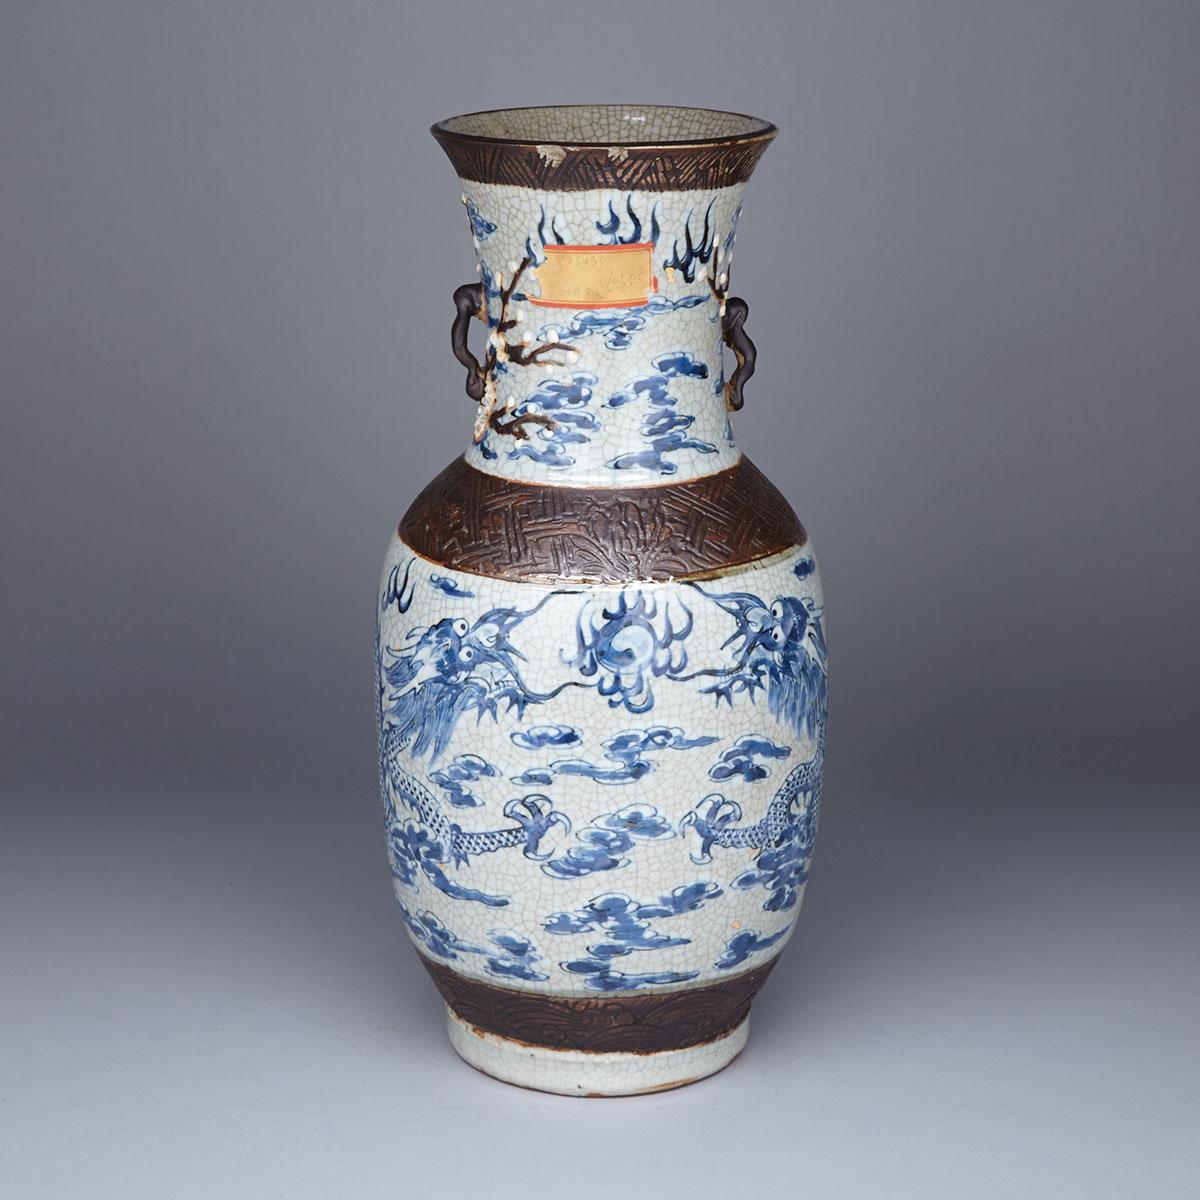 Blue and White Crackle Glazed Dragon Vase, Chenghua Mark, Early 19th Century